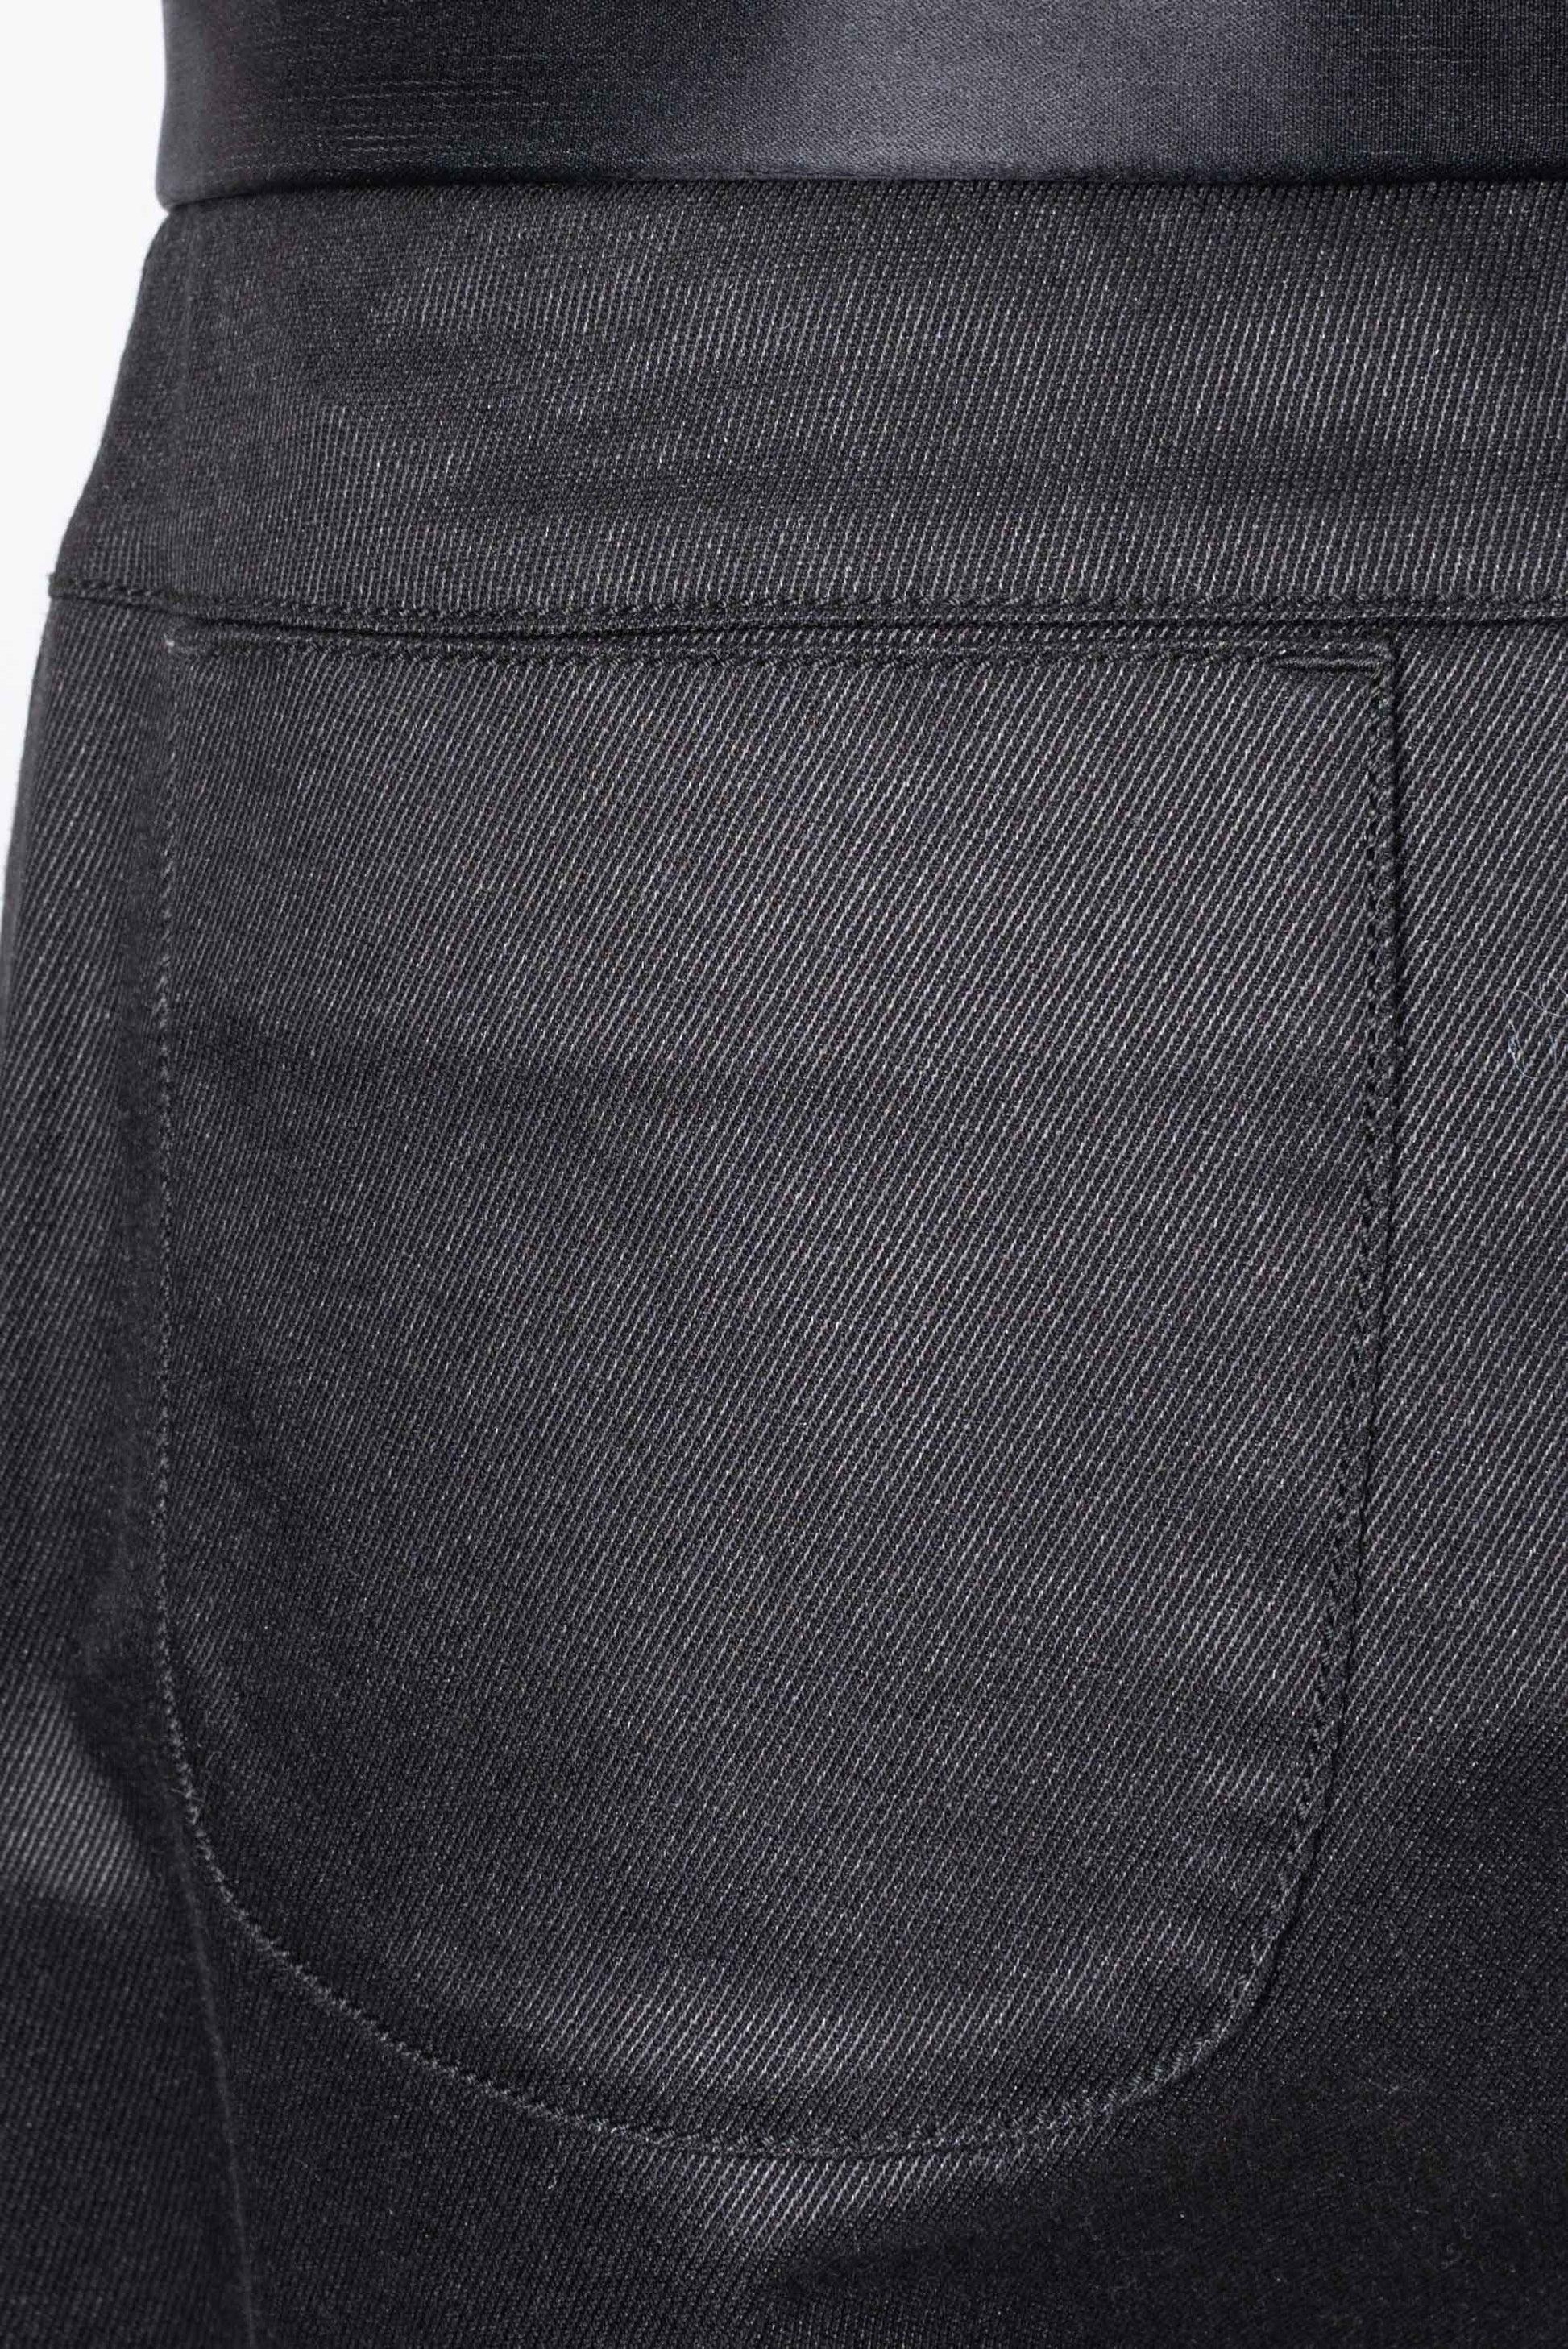 Chanel Capri Pants in Cotton and Silk, 2005 For Sale 4